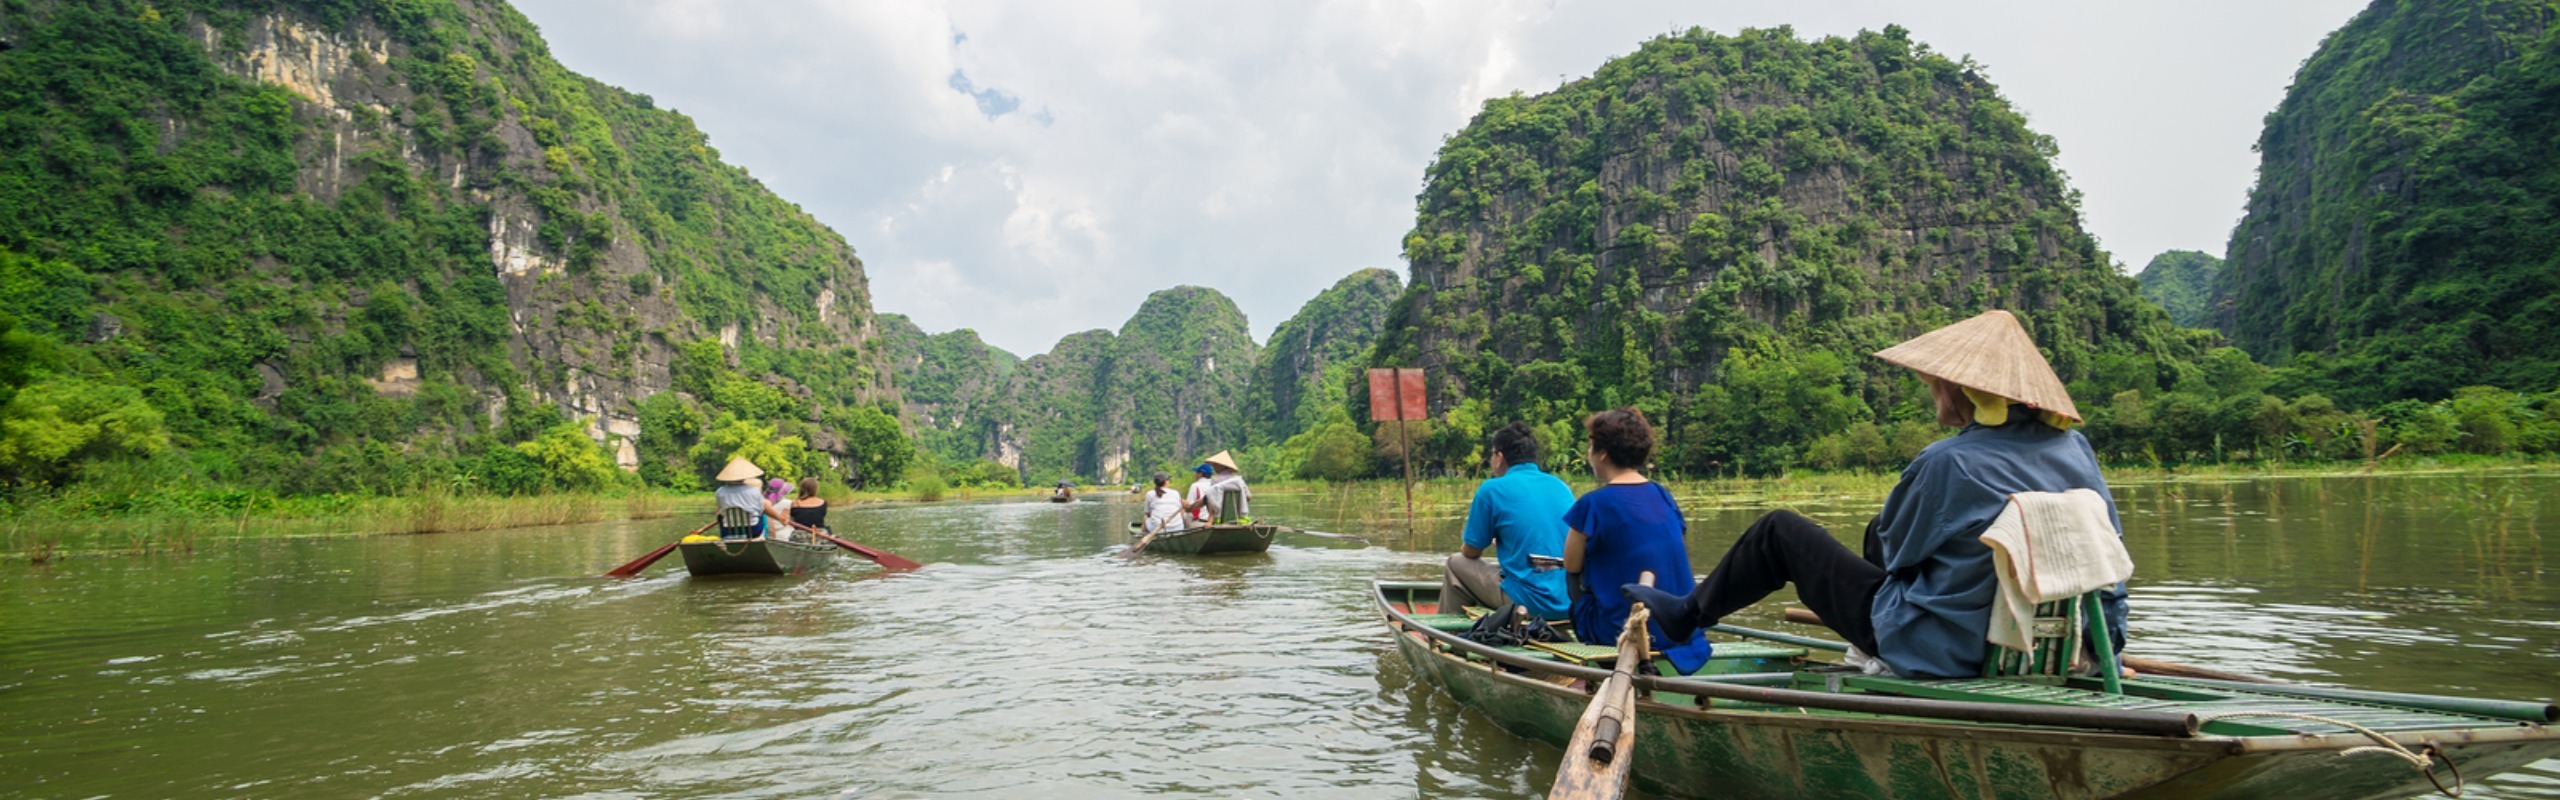 Vietnam Weather in April: Still Good Time to Go? Insider Tips 